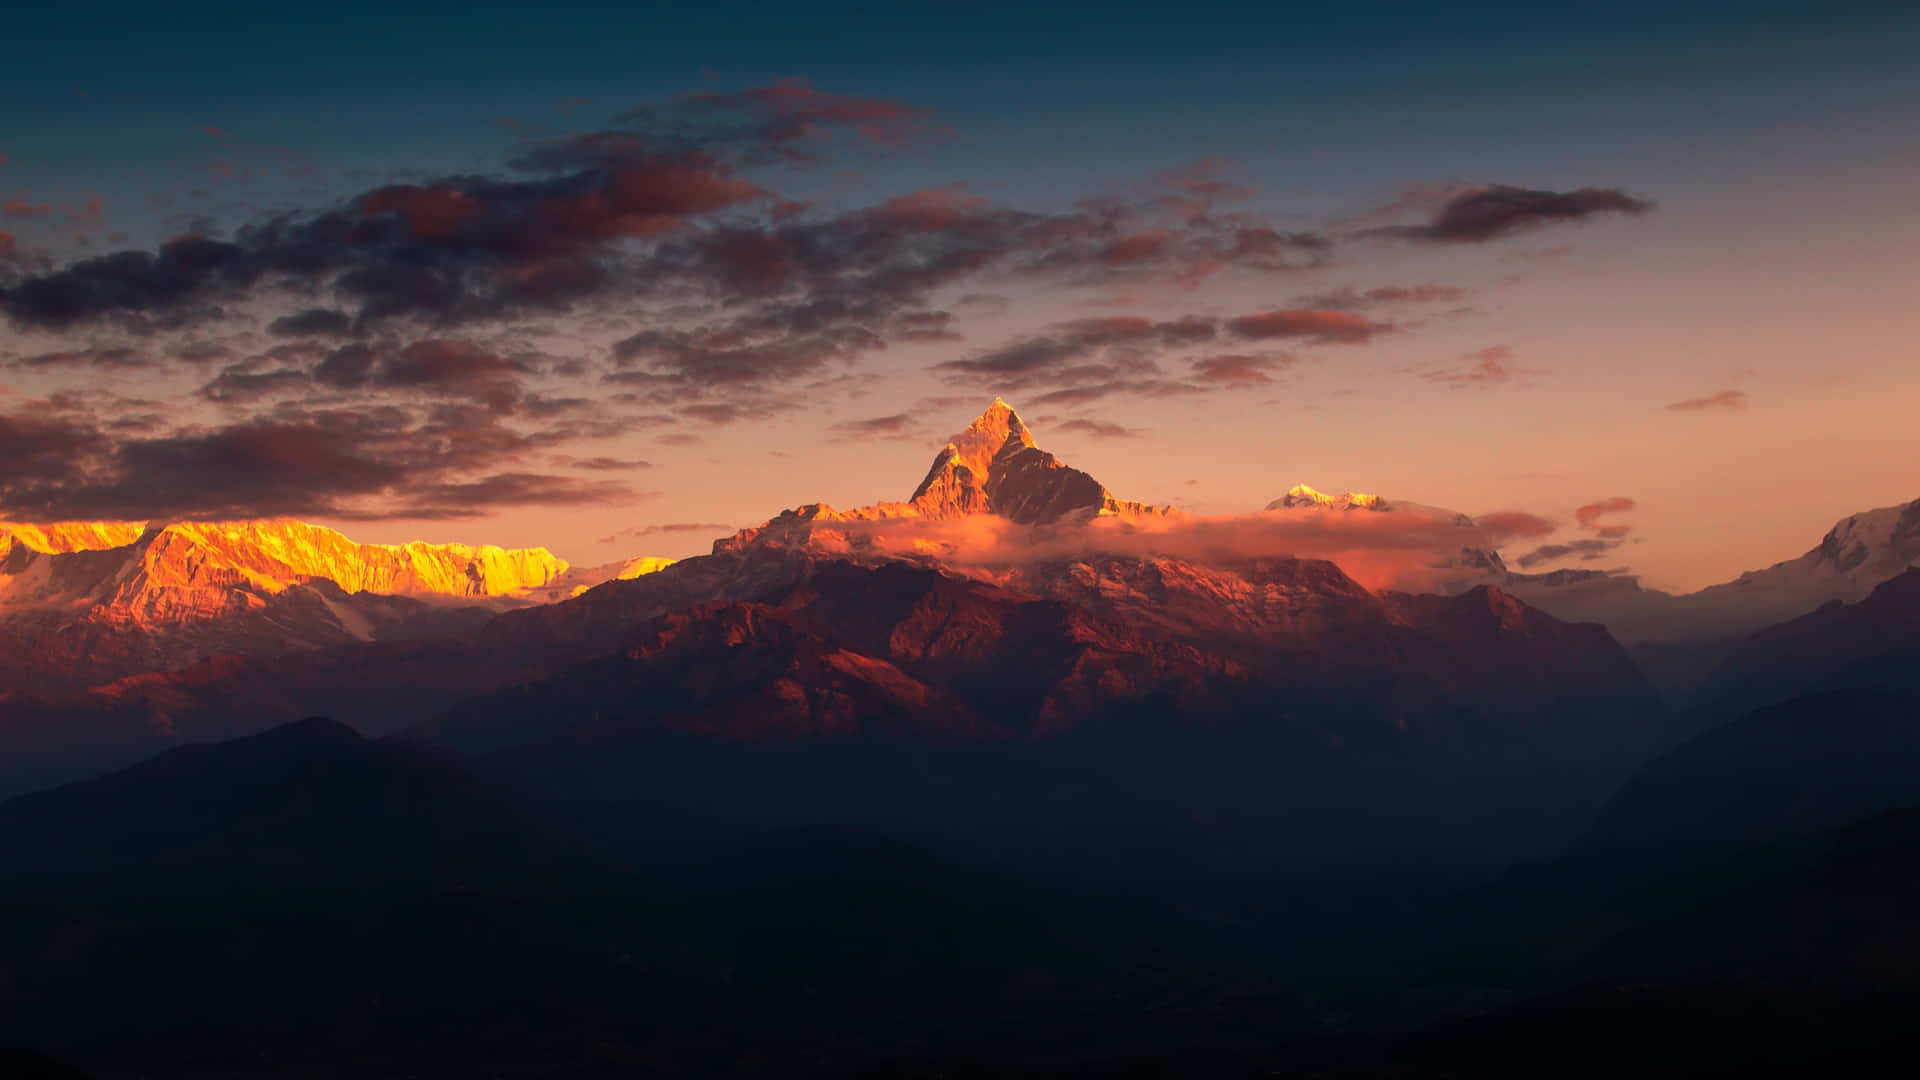 A breathtaking view of Mount Himalaya, the world's highest mountain range